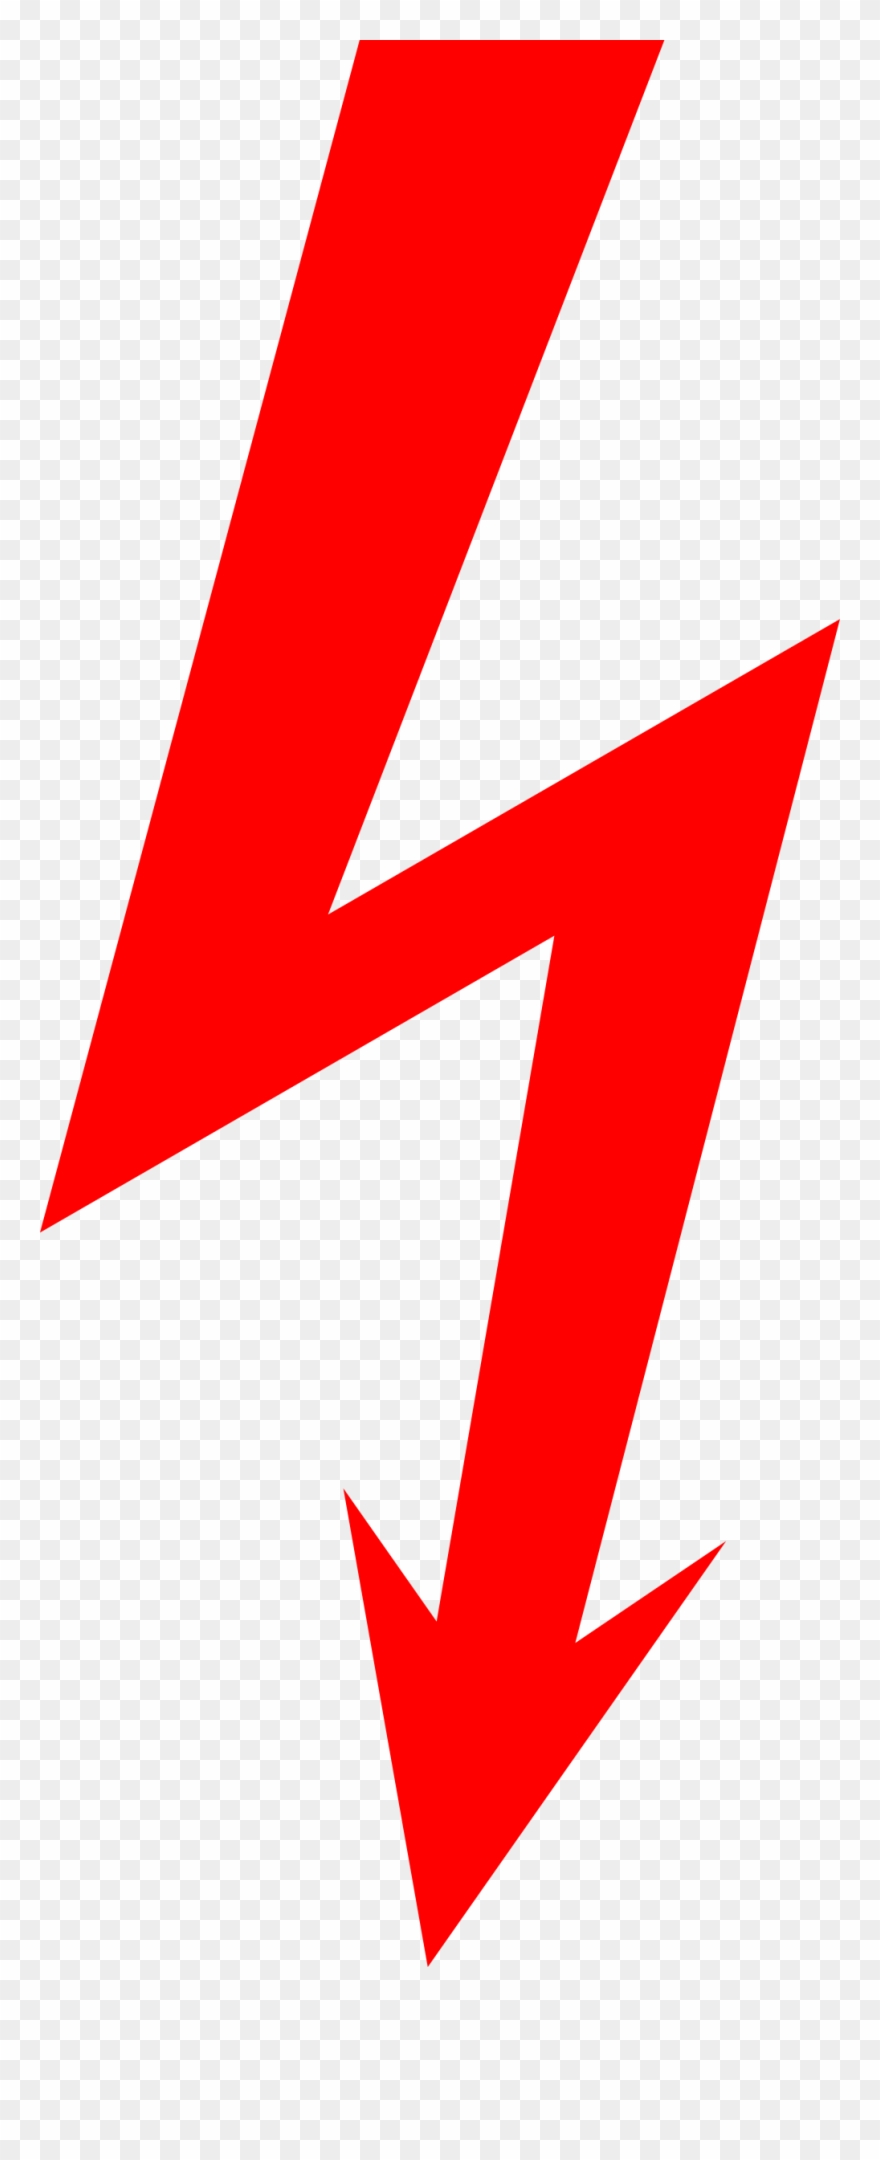 electrical clipart electricity sign